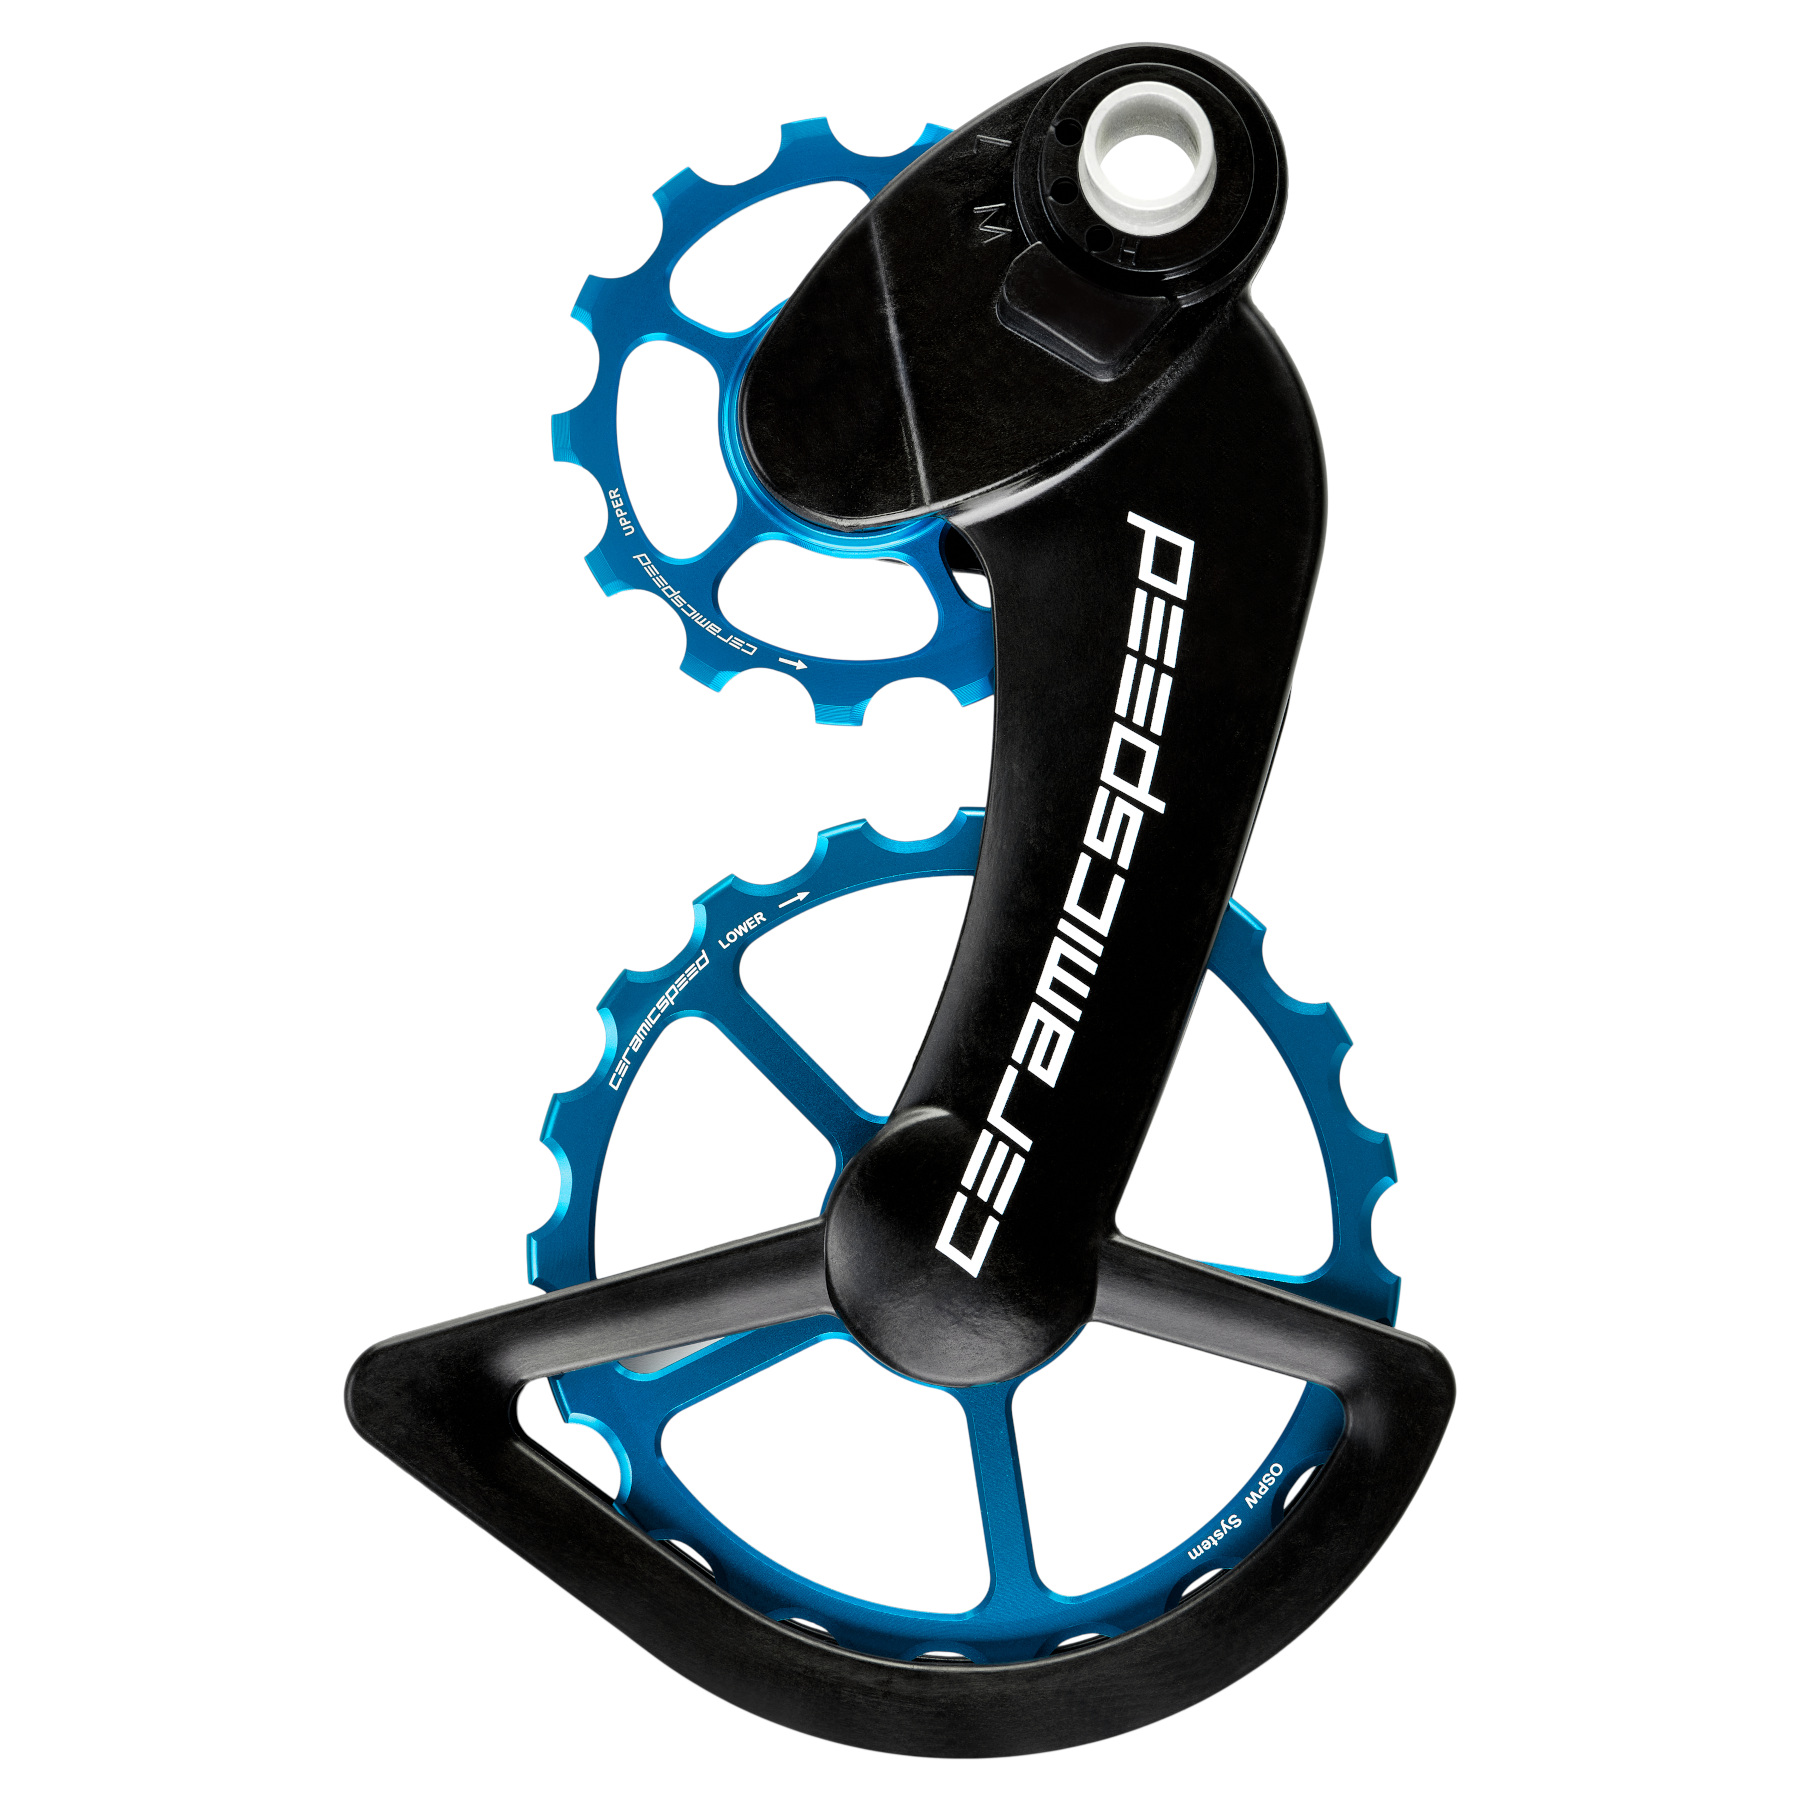 Picture of CeramicSpeed OSPW Derailleur Pulley System - for Campagnolo 11s | 13/19 Teeth - blue